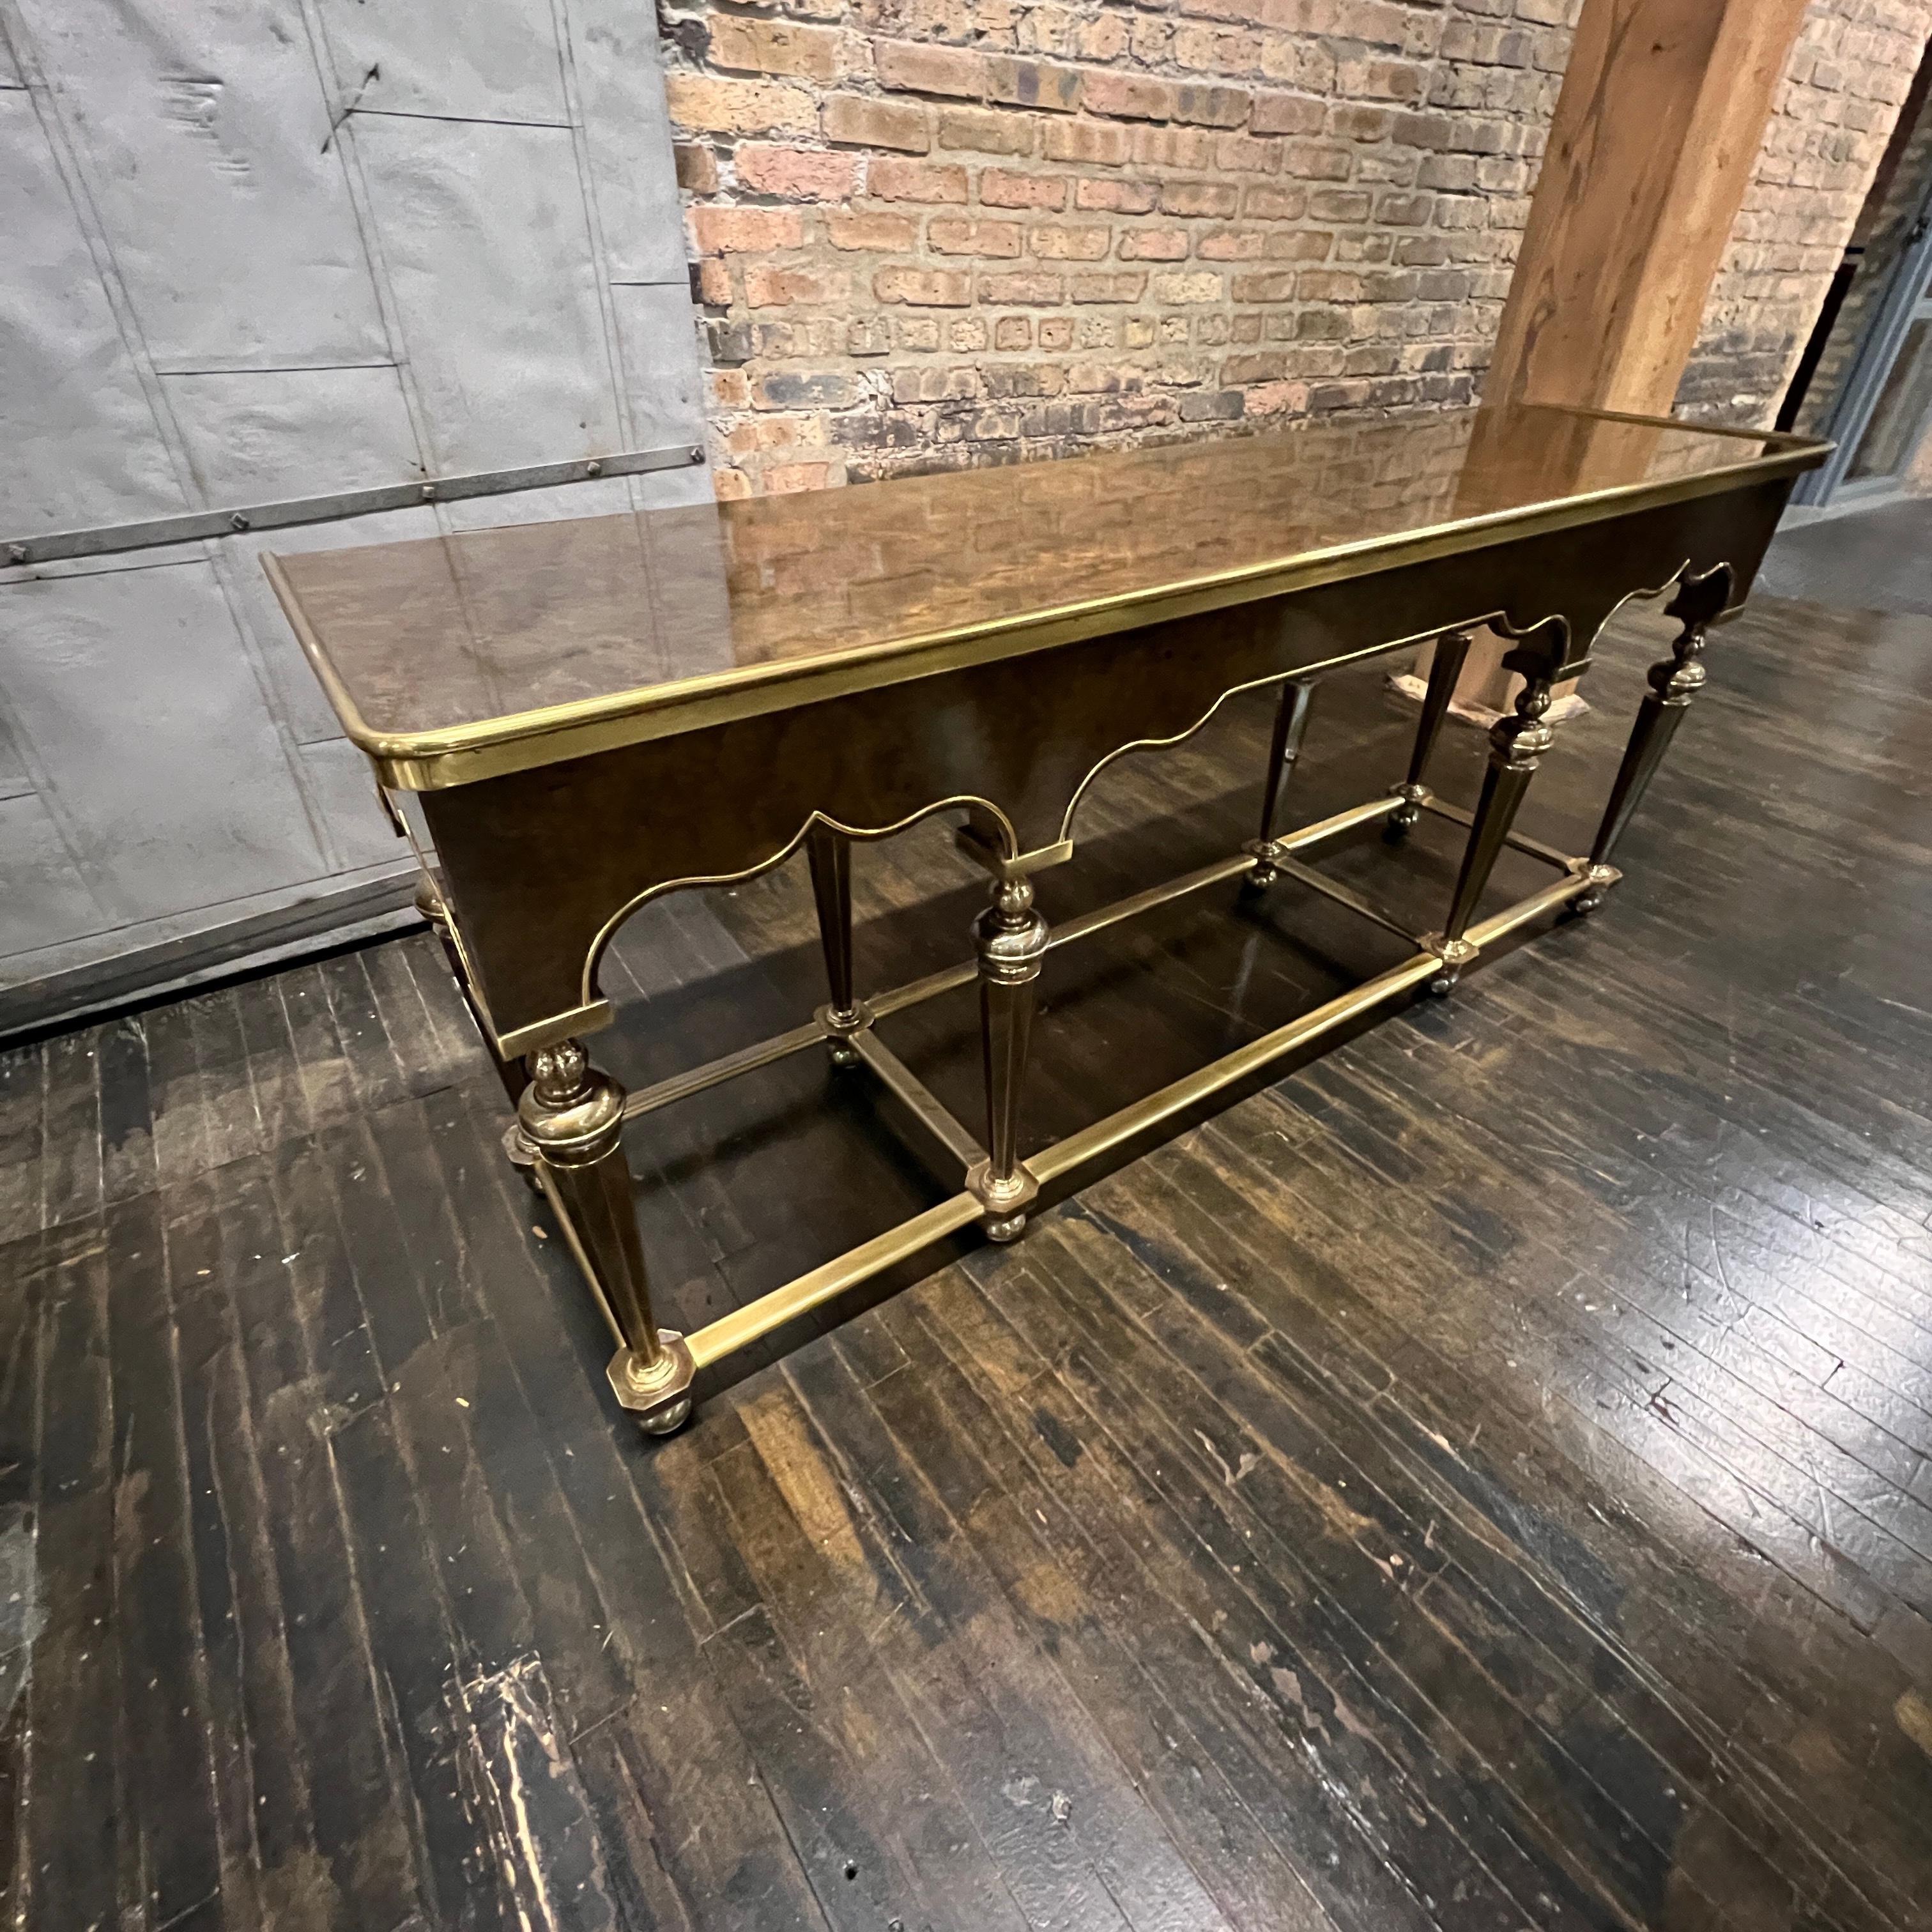 Lovely Hollywood Regency style brass and burl wood console attributed to Mastercraft.  It has a burl wood top and apron that have a lovely brass detail around all the arched edges.  It sits on eight brass legs with brass supports between the legs. 